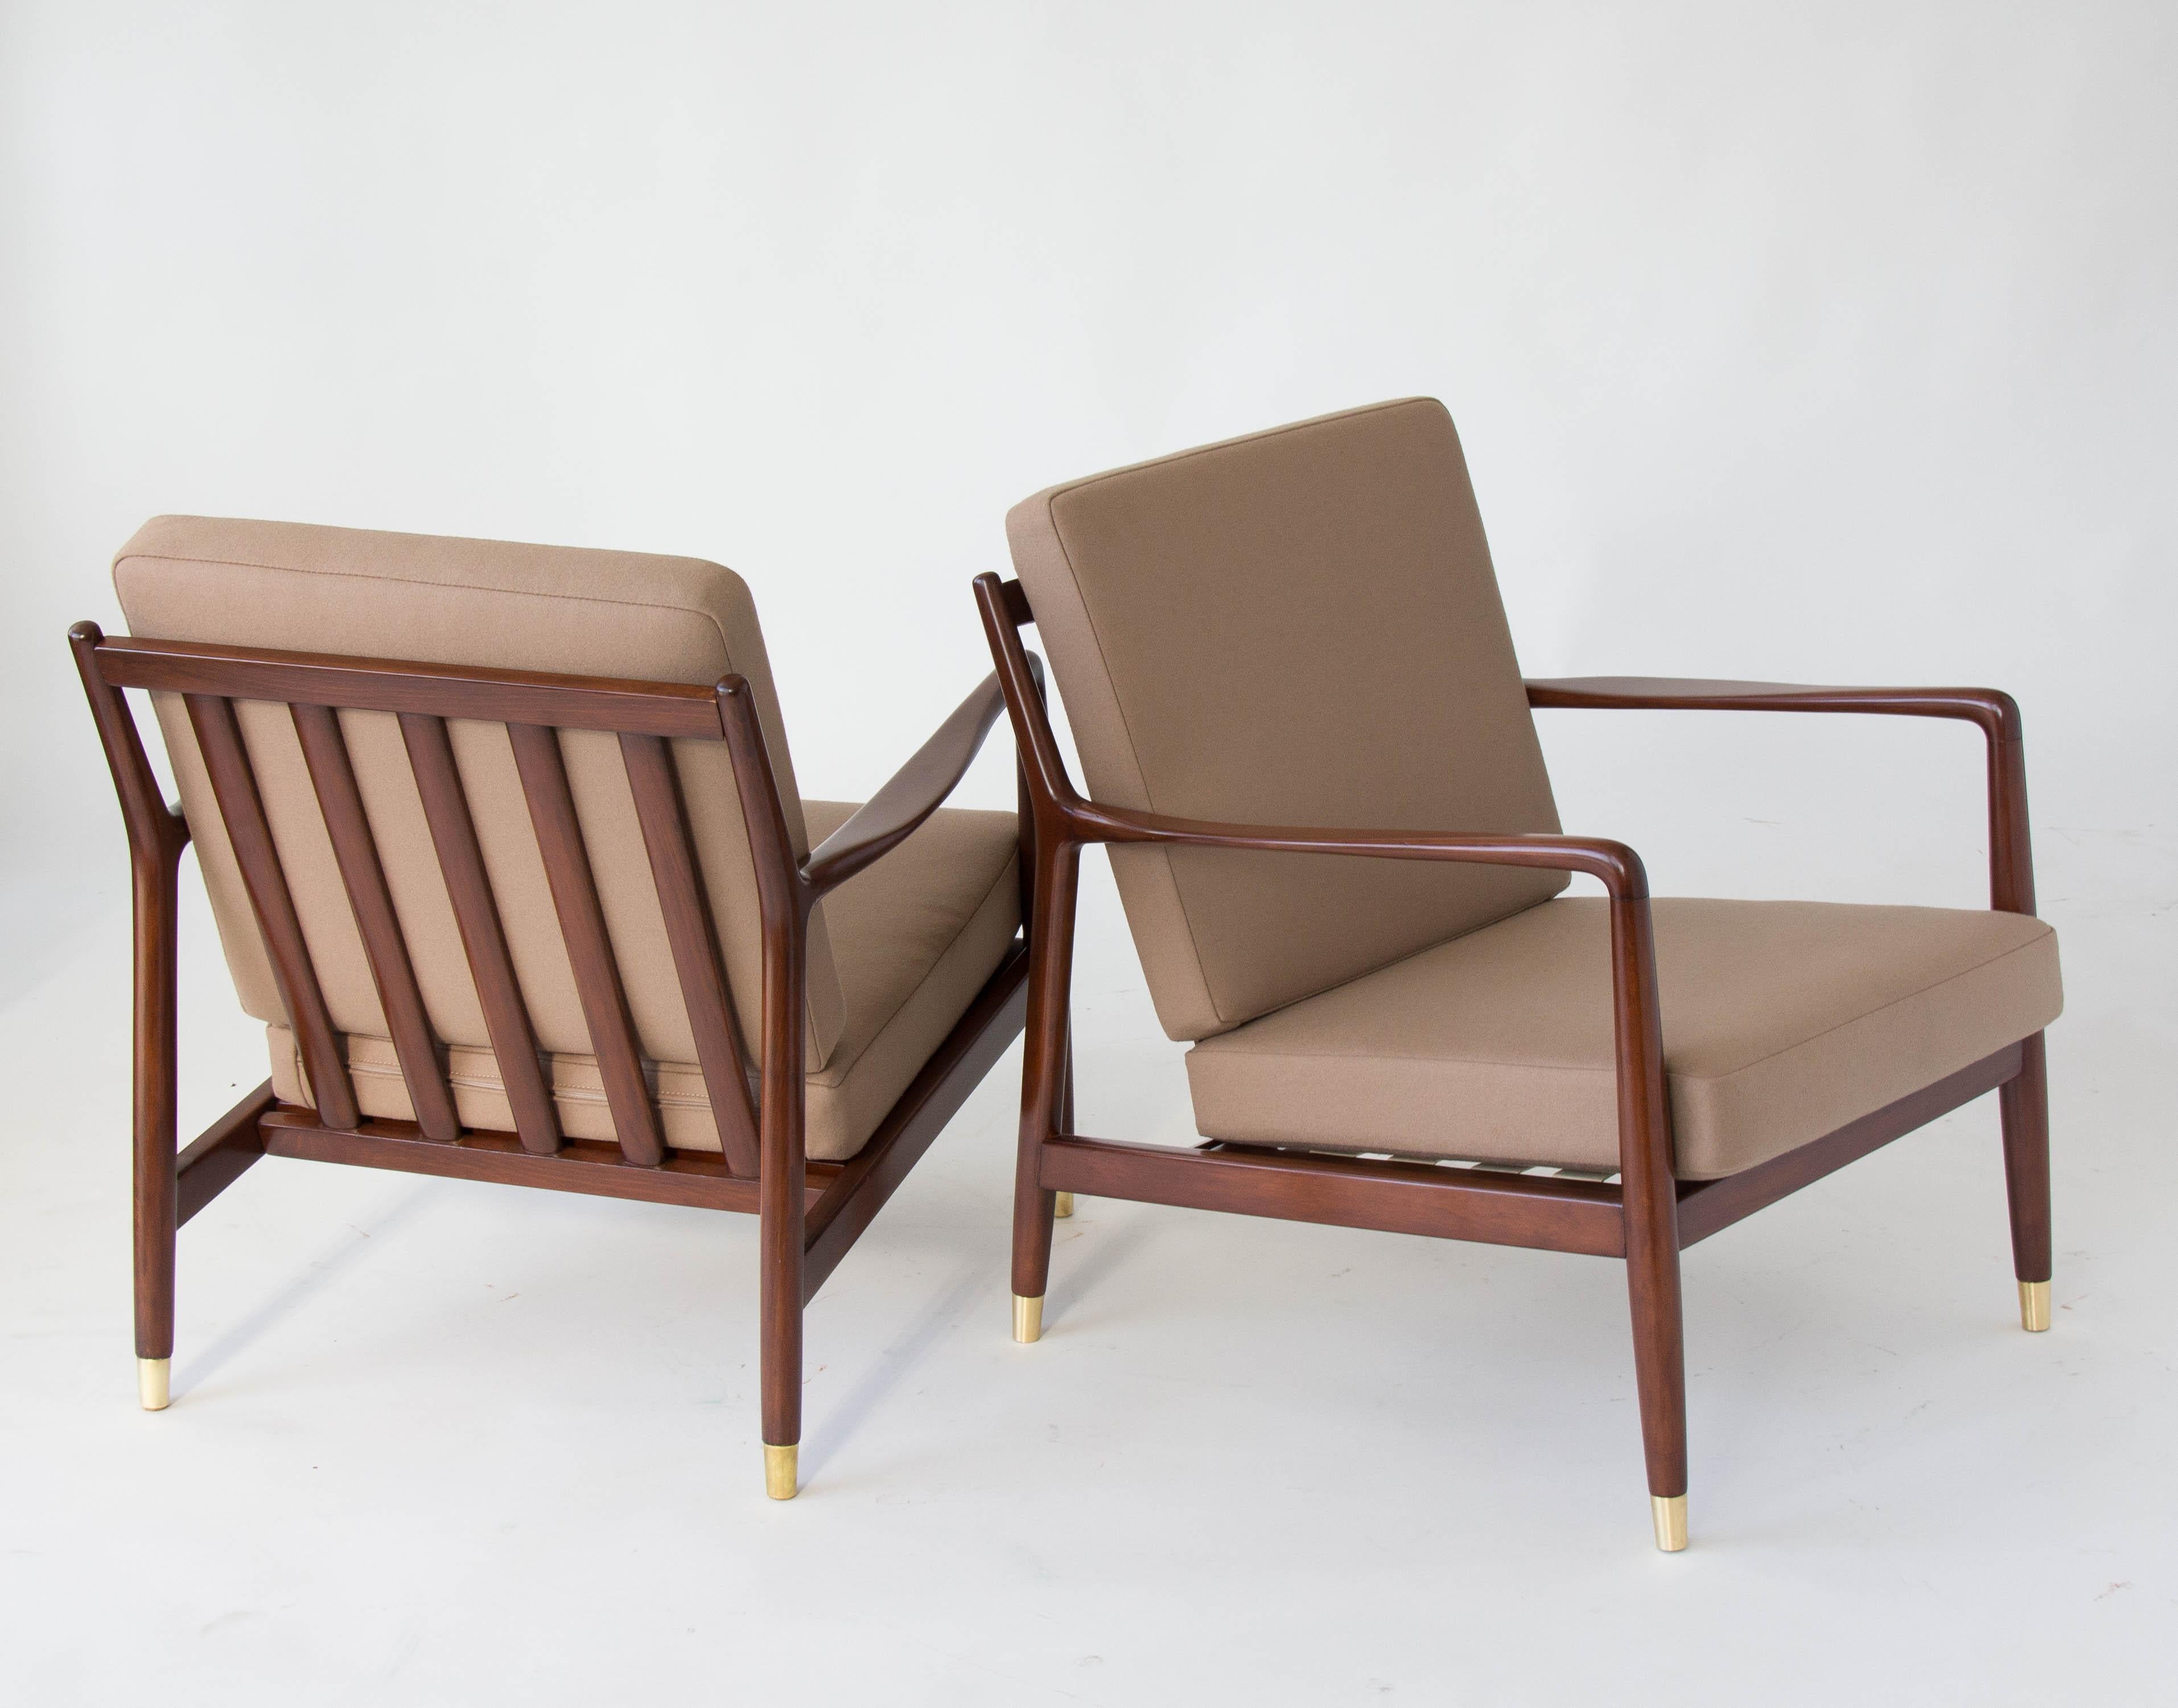 Pair of Lounge Chairs with Brass-Capped Legs by Folke Ohlsson for DUX 1